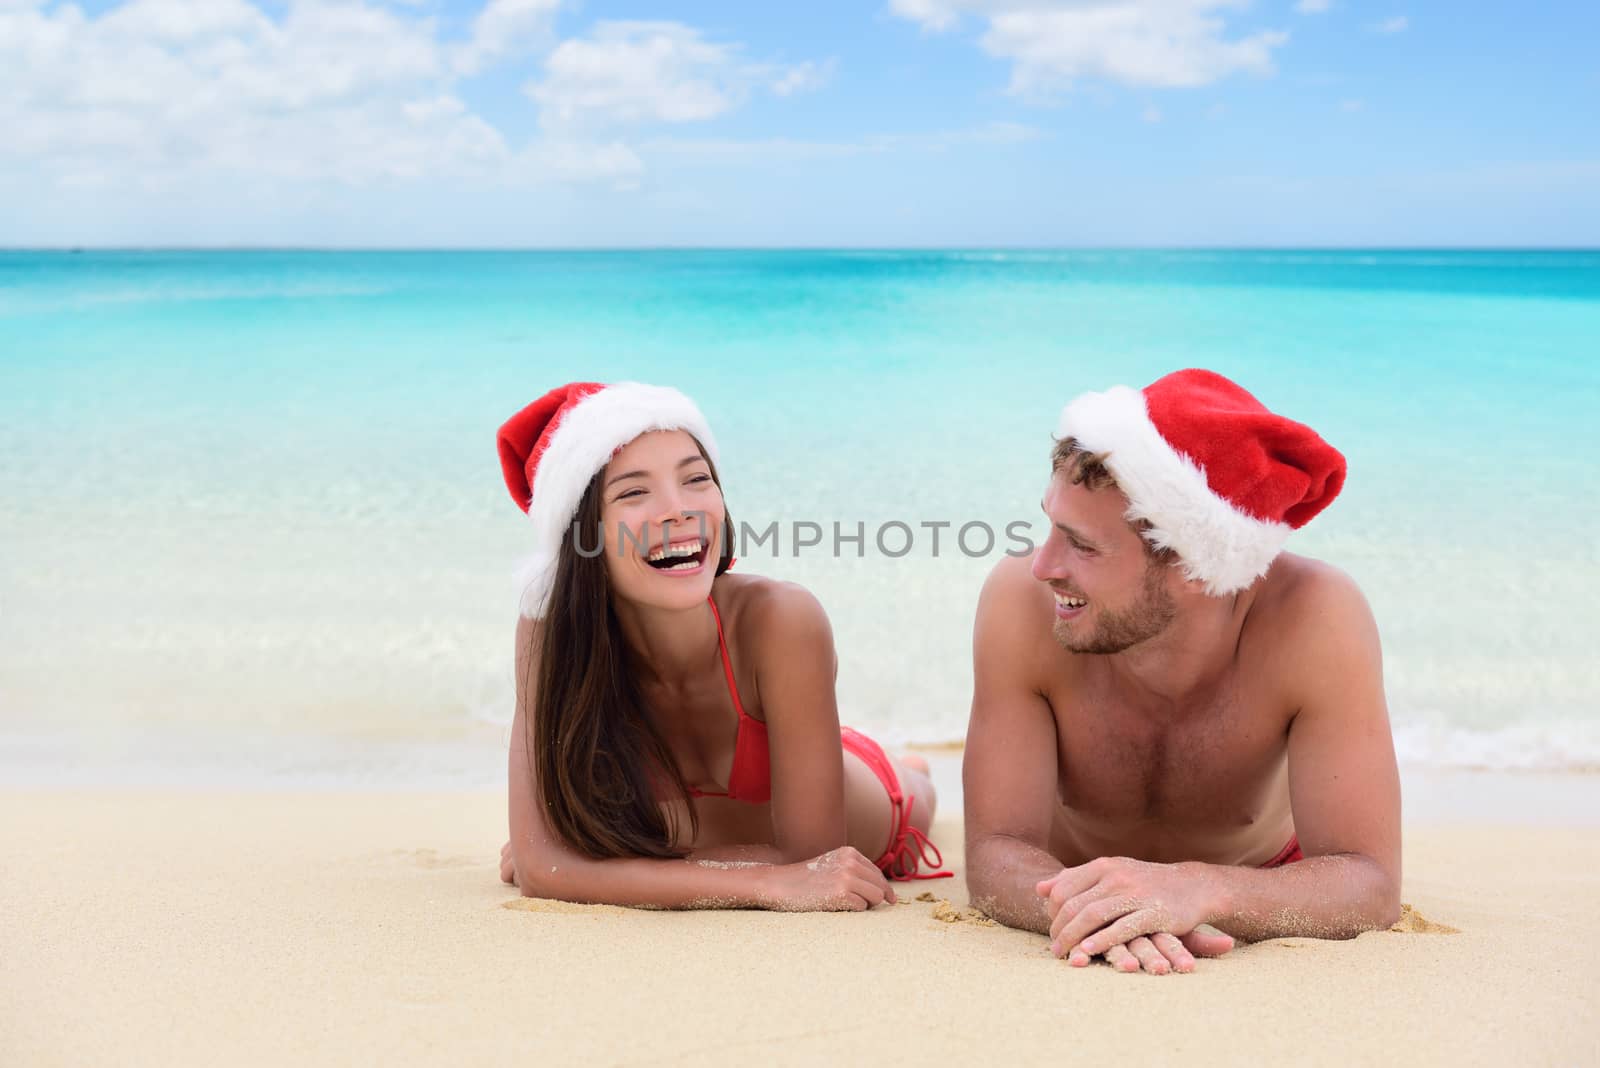 Christmas couple relaxing on beach winter vacation. Happy young adults friends or in love laughing on white sand in tropical travel destination for their new year holiday.